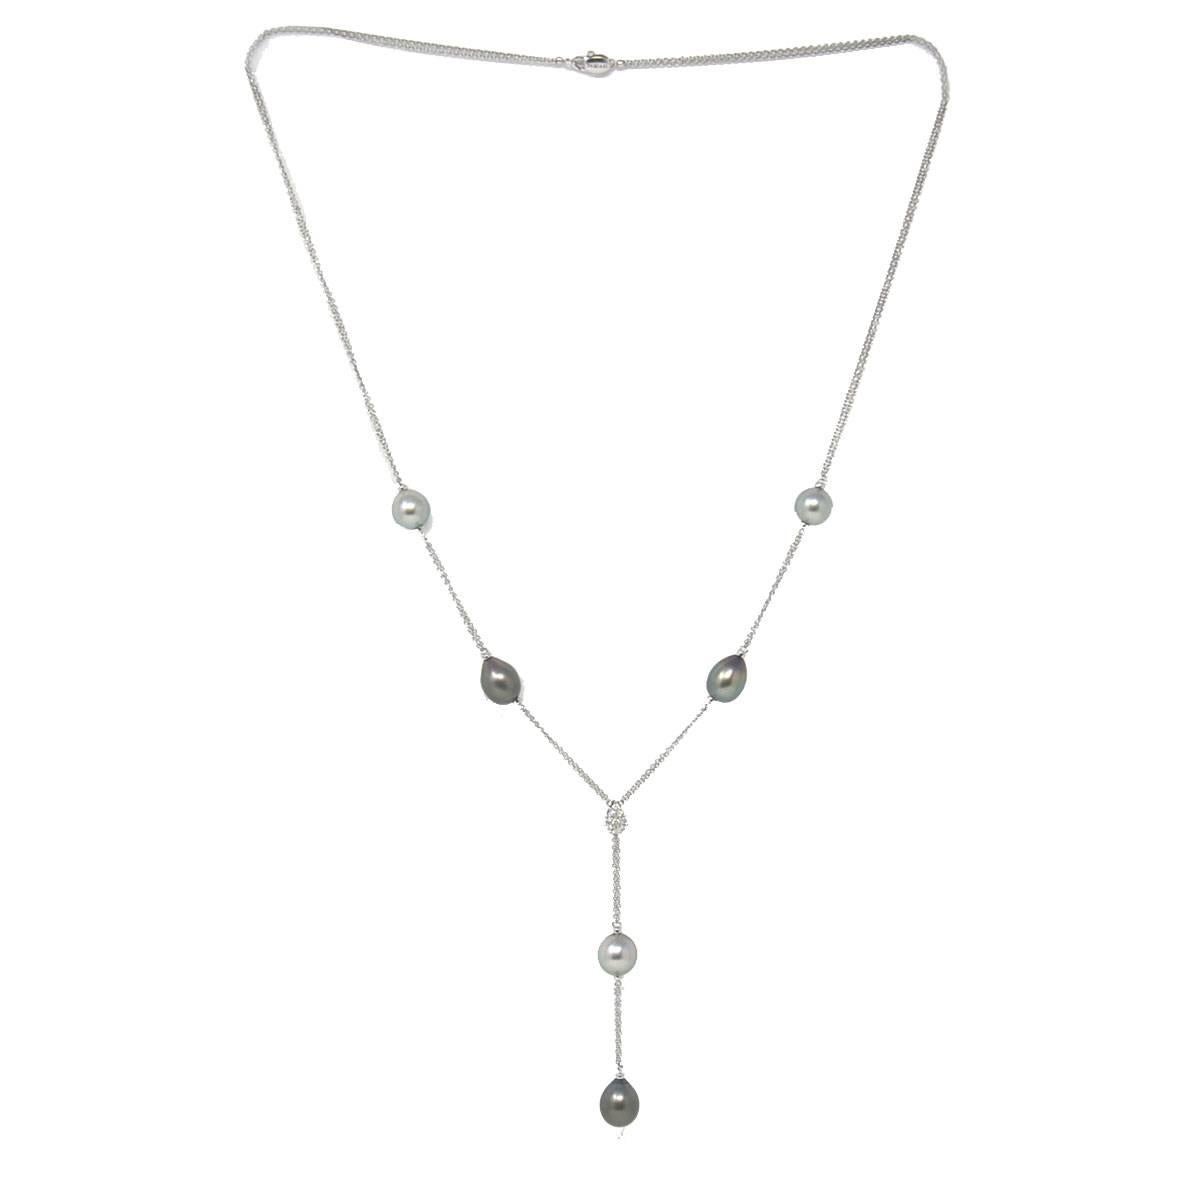 Company - Damiani 
Style - Ninfea Drop Necklace
Metal - 18k White Gold
Stones - Tahitian Pearls (approx. 10mm ) Diamonds (approx. 0.35cts)
Weight - 23.1 Grams
Lenght - 26